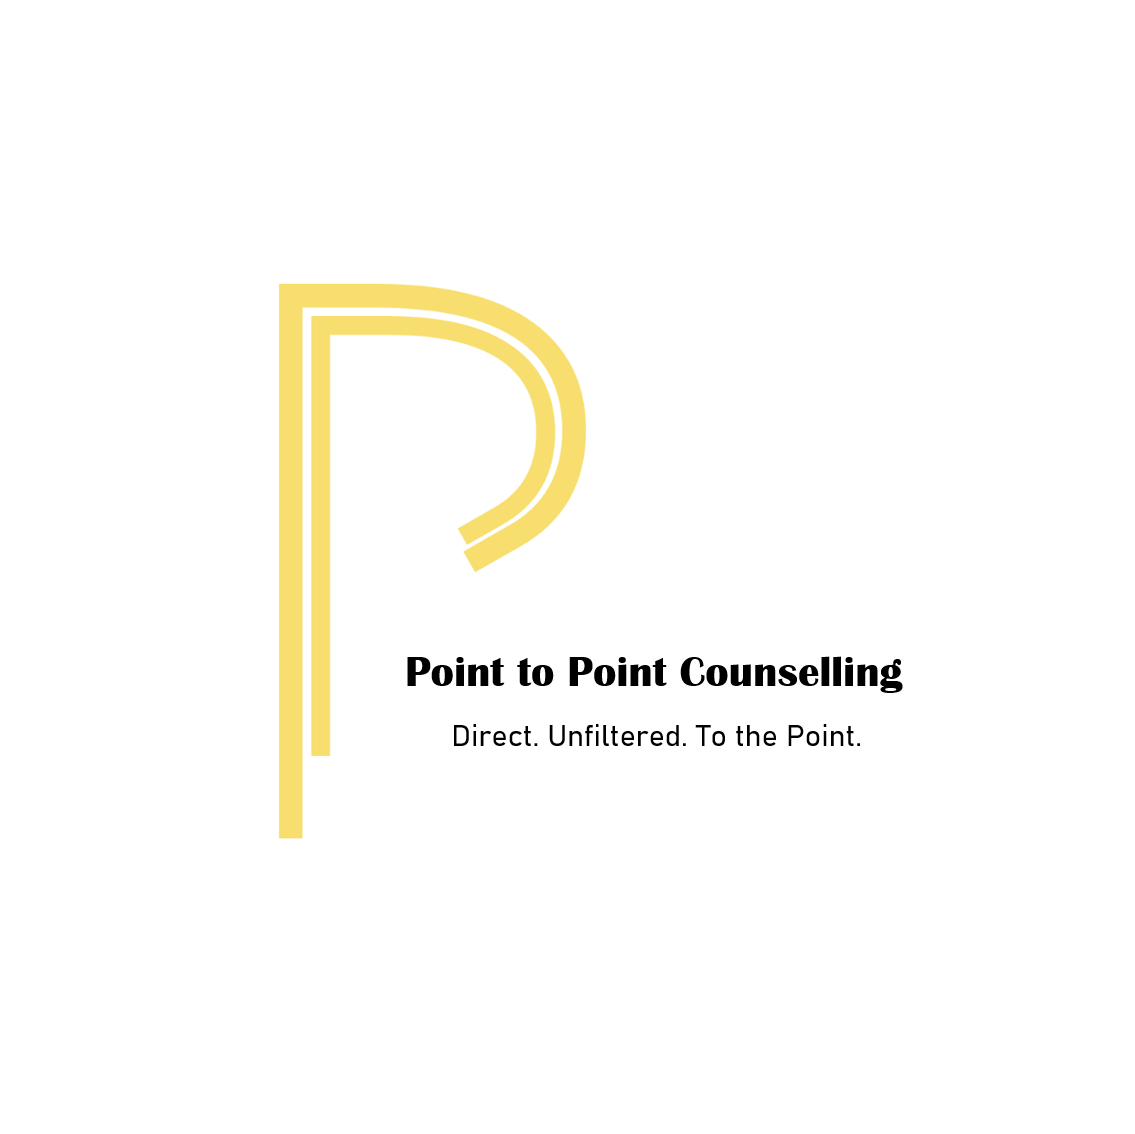 Point to Point Counselling